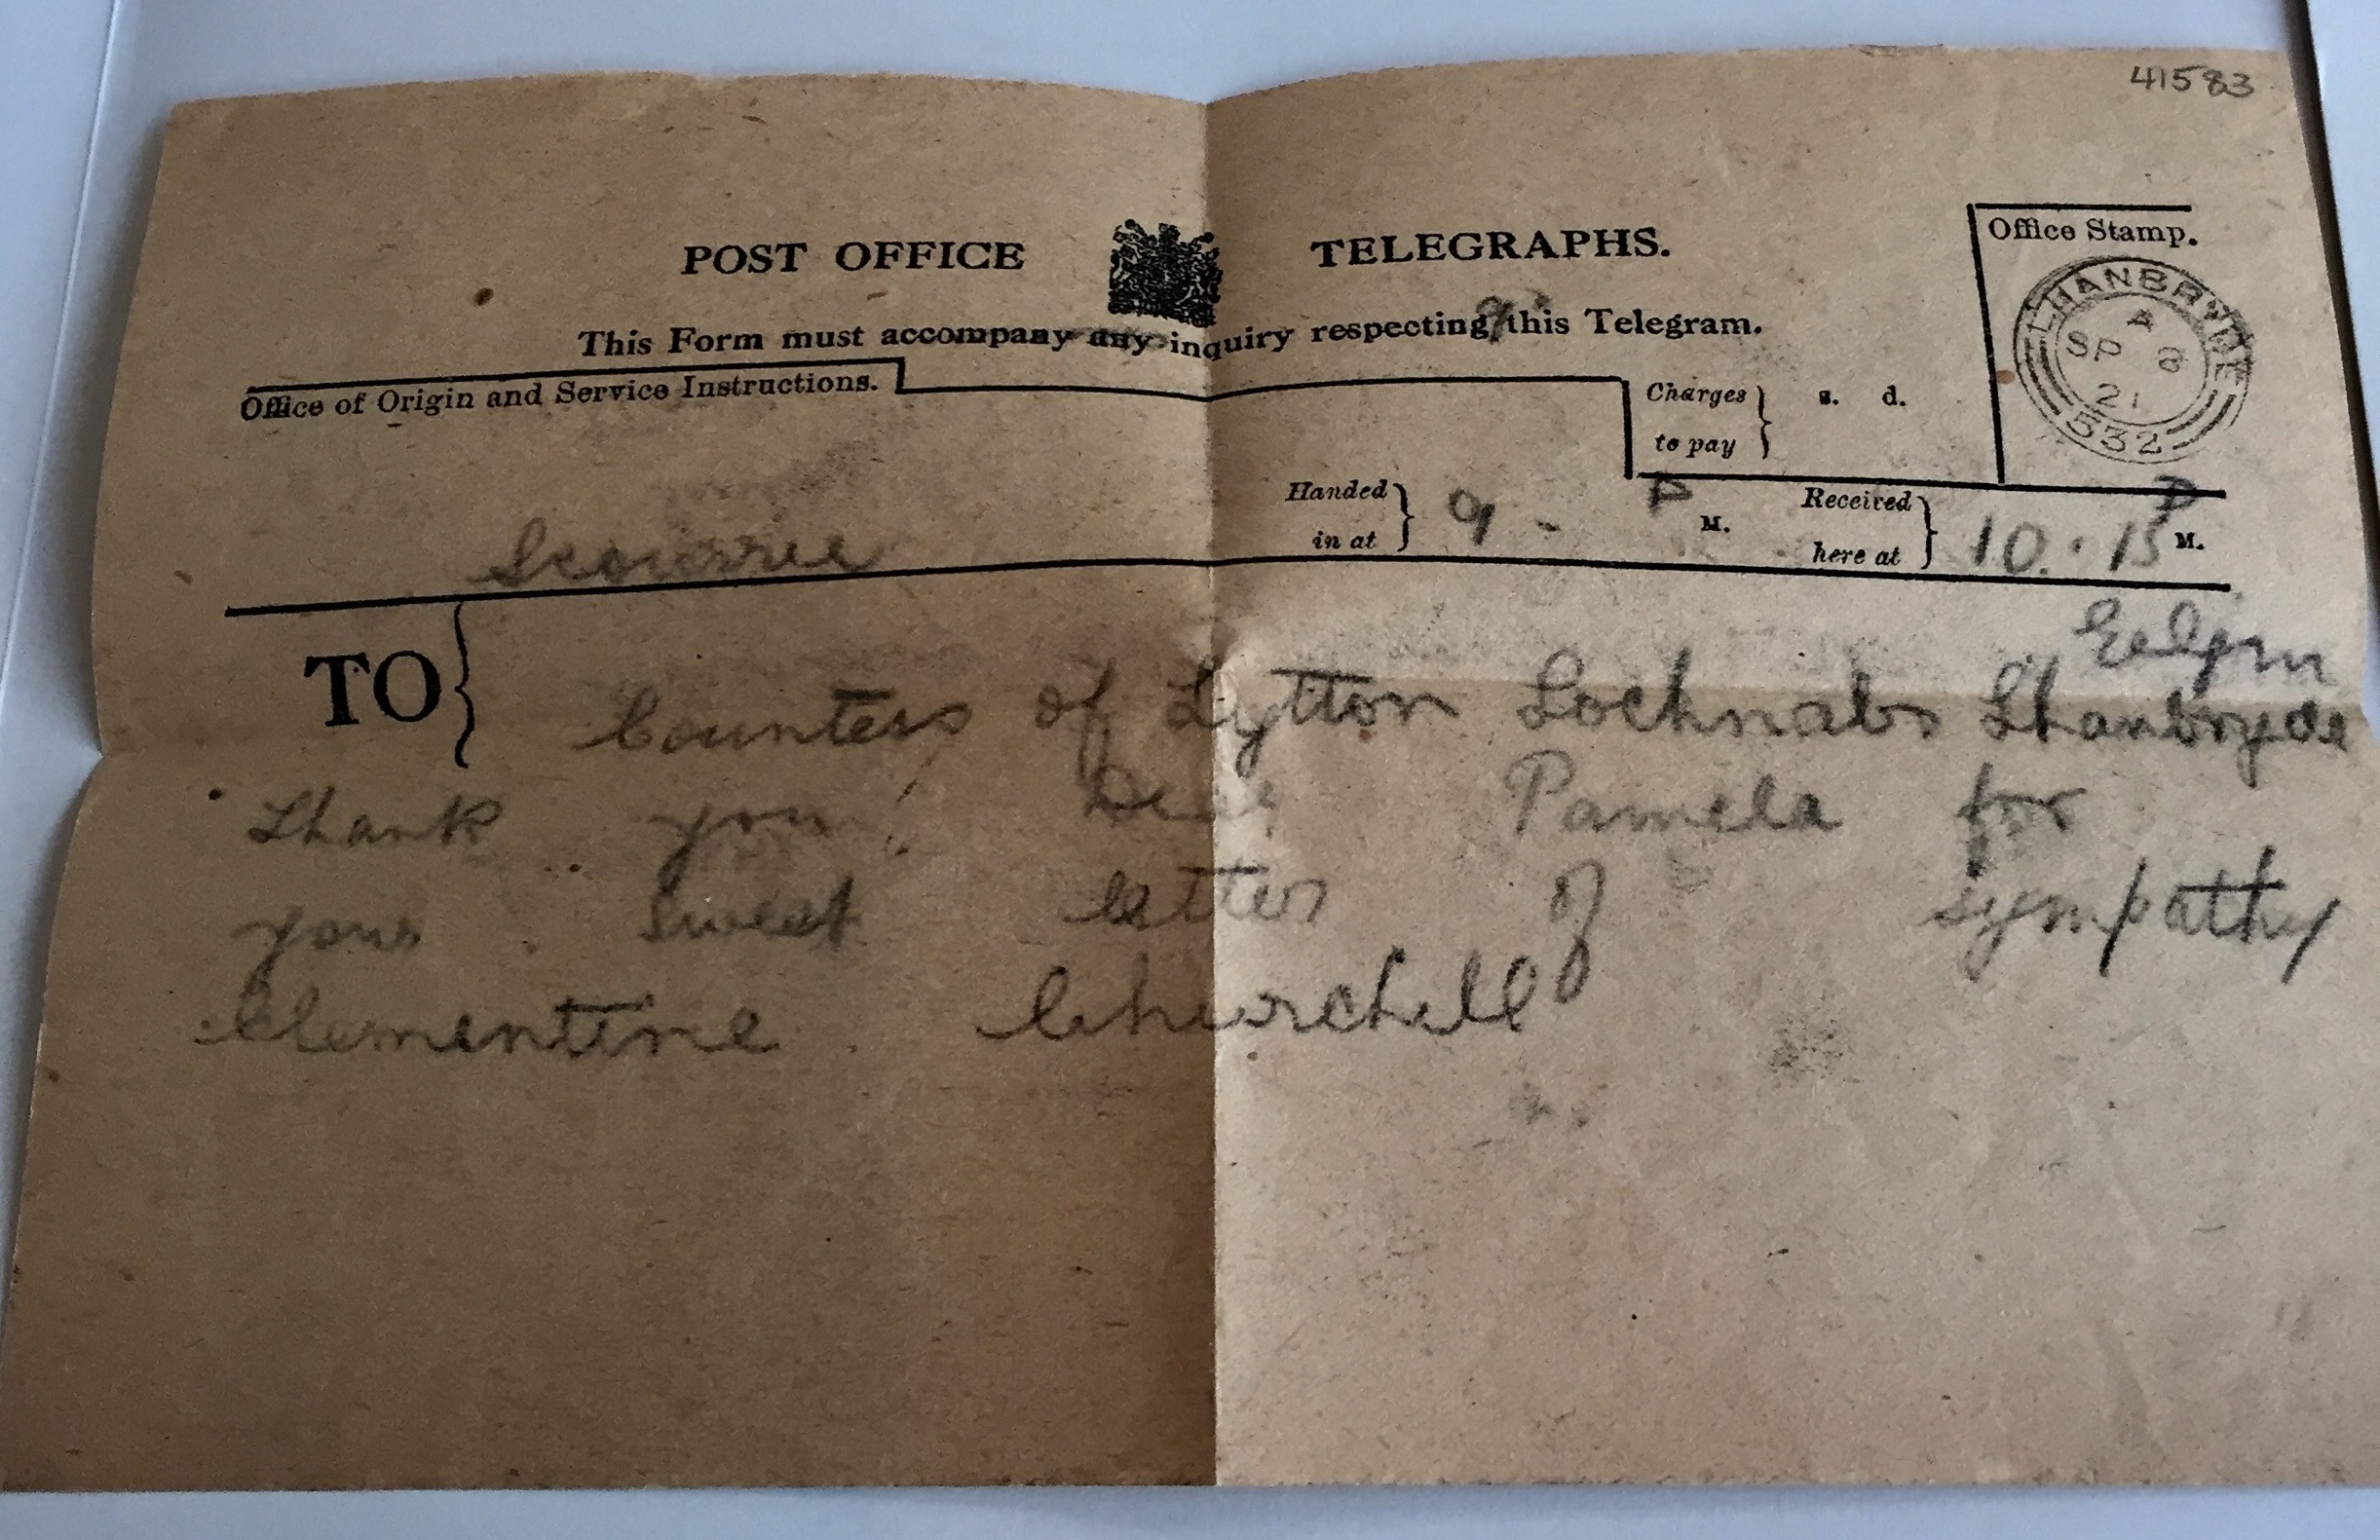 Instructions for a telegram to Pamela from Clementine